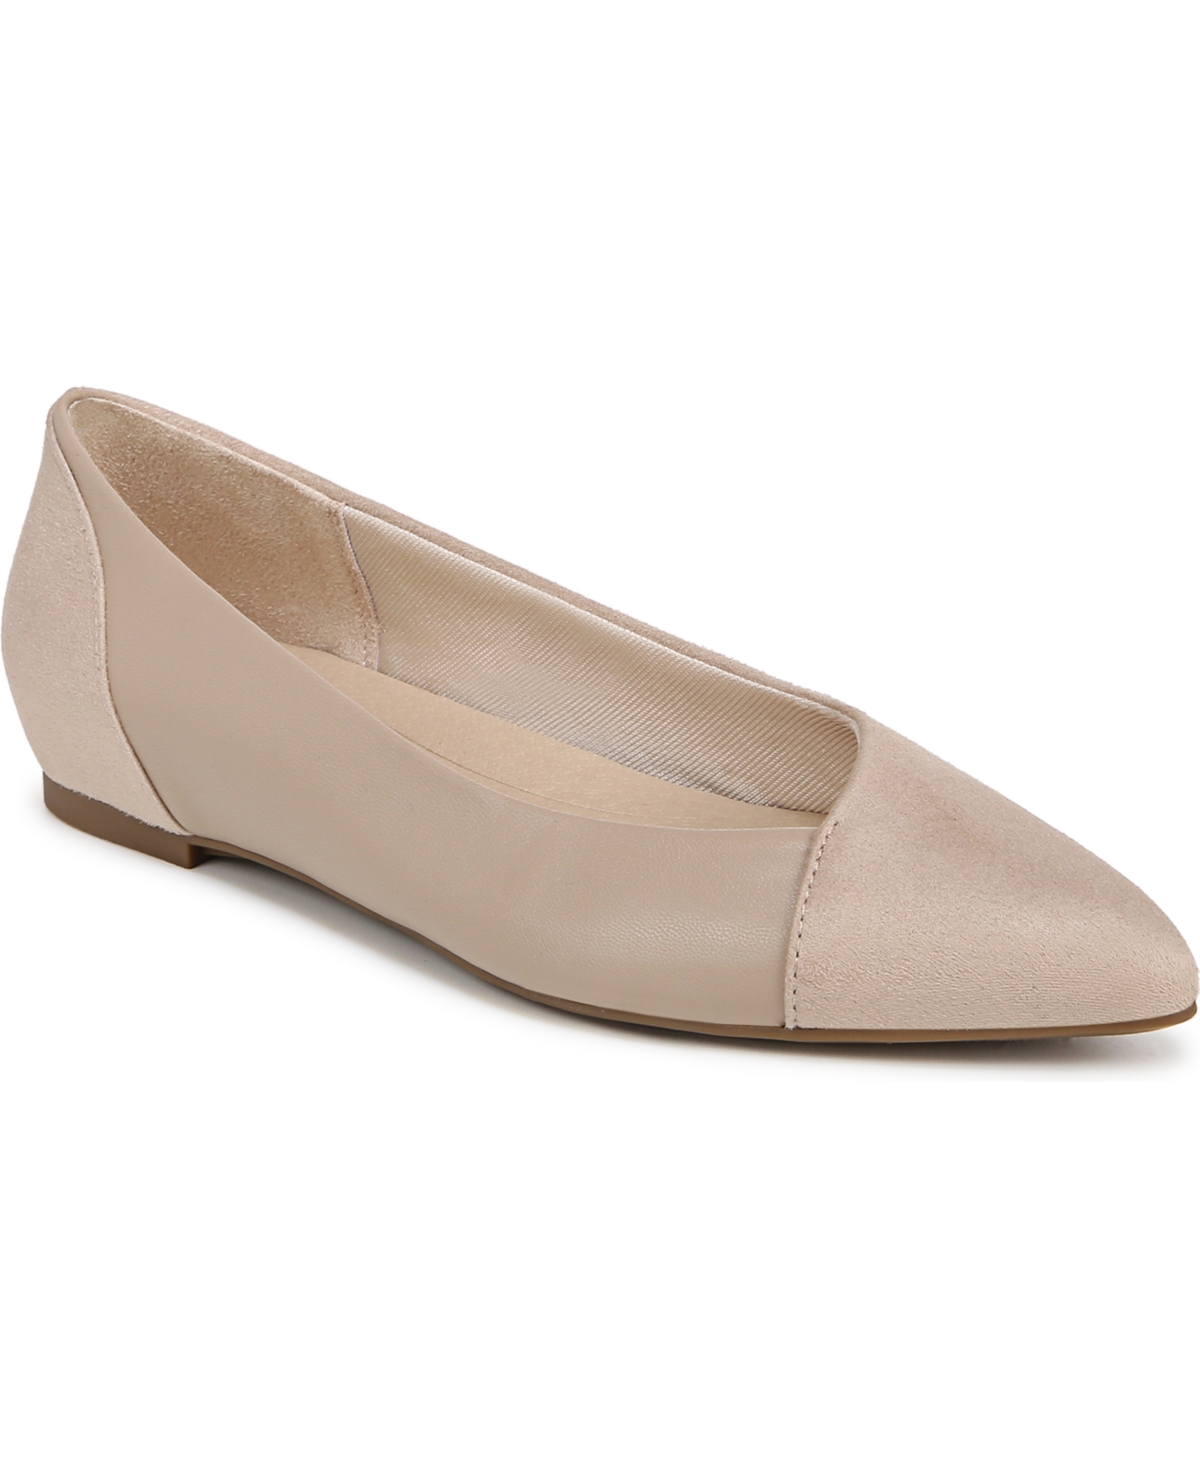 Promise Ballet Flats - Tender Taupe Faux Leather/Microsuede